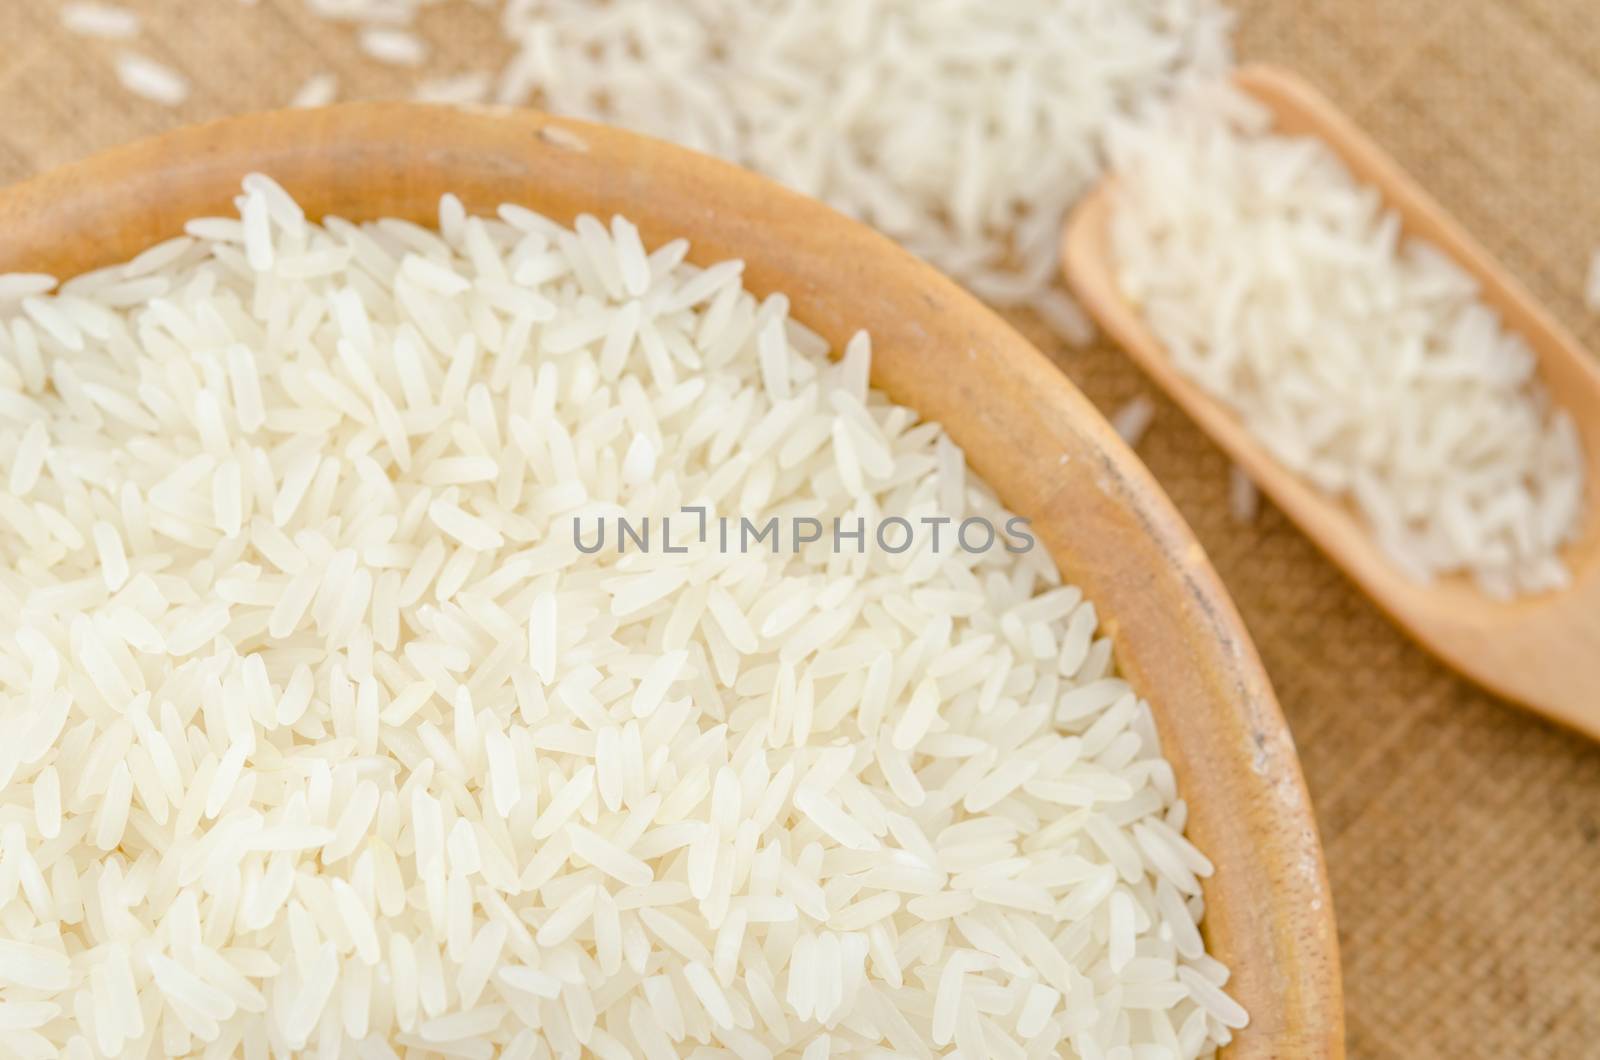 Raw white rice in wooden bowl on sack background.